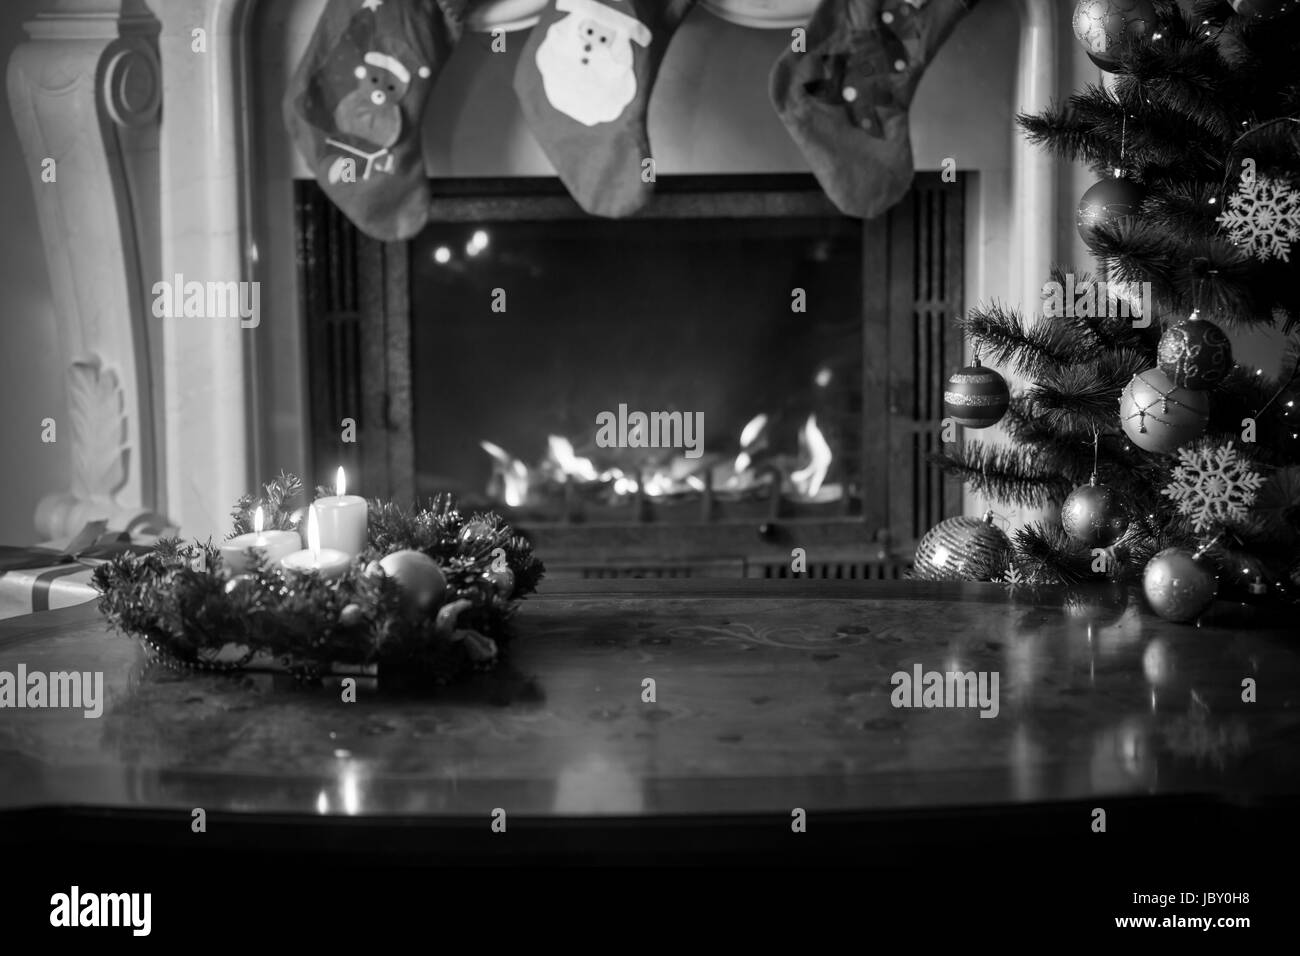 Black and white background with wooden table in front of burning fireplace, burning fireplace and Christmas tree Stock Photo